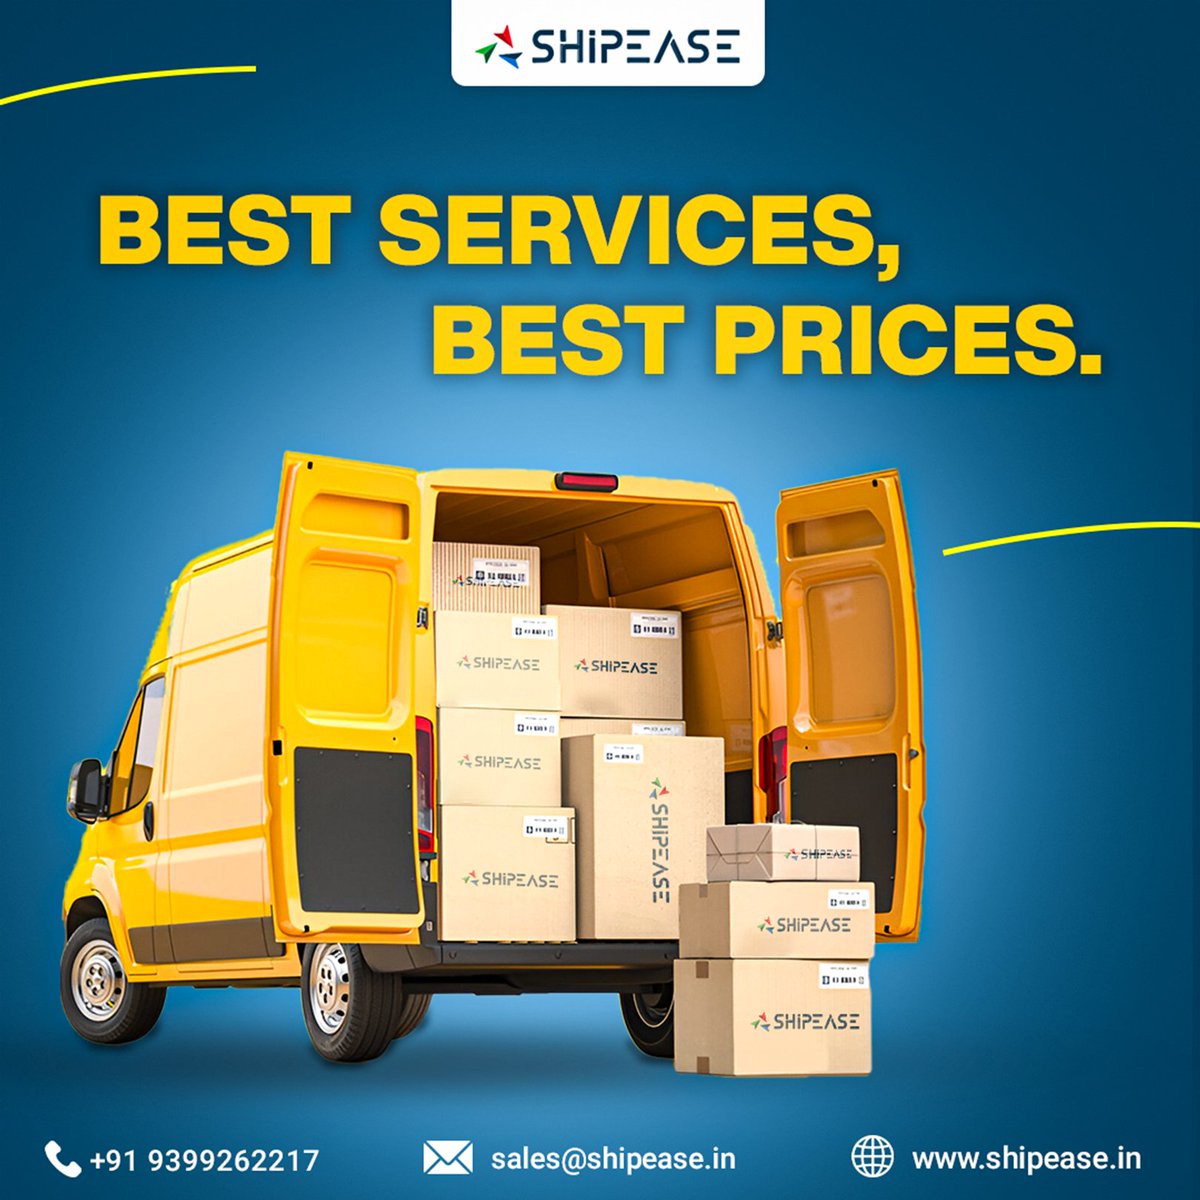 Shipease not only offers the best services but the best prices too starting from 20 rs/500g.

#Shipease #AffordableShipping #BestPrices #ConvenientService #ShipWithEase #FastDelivery #ShippingSolutions